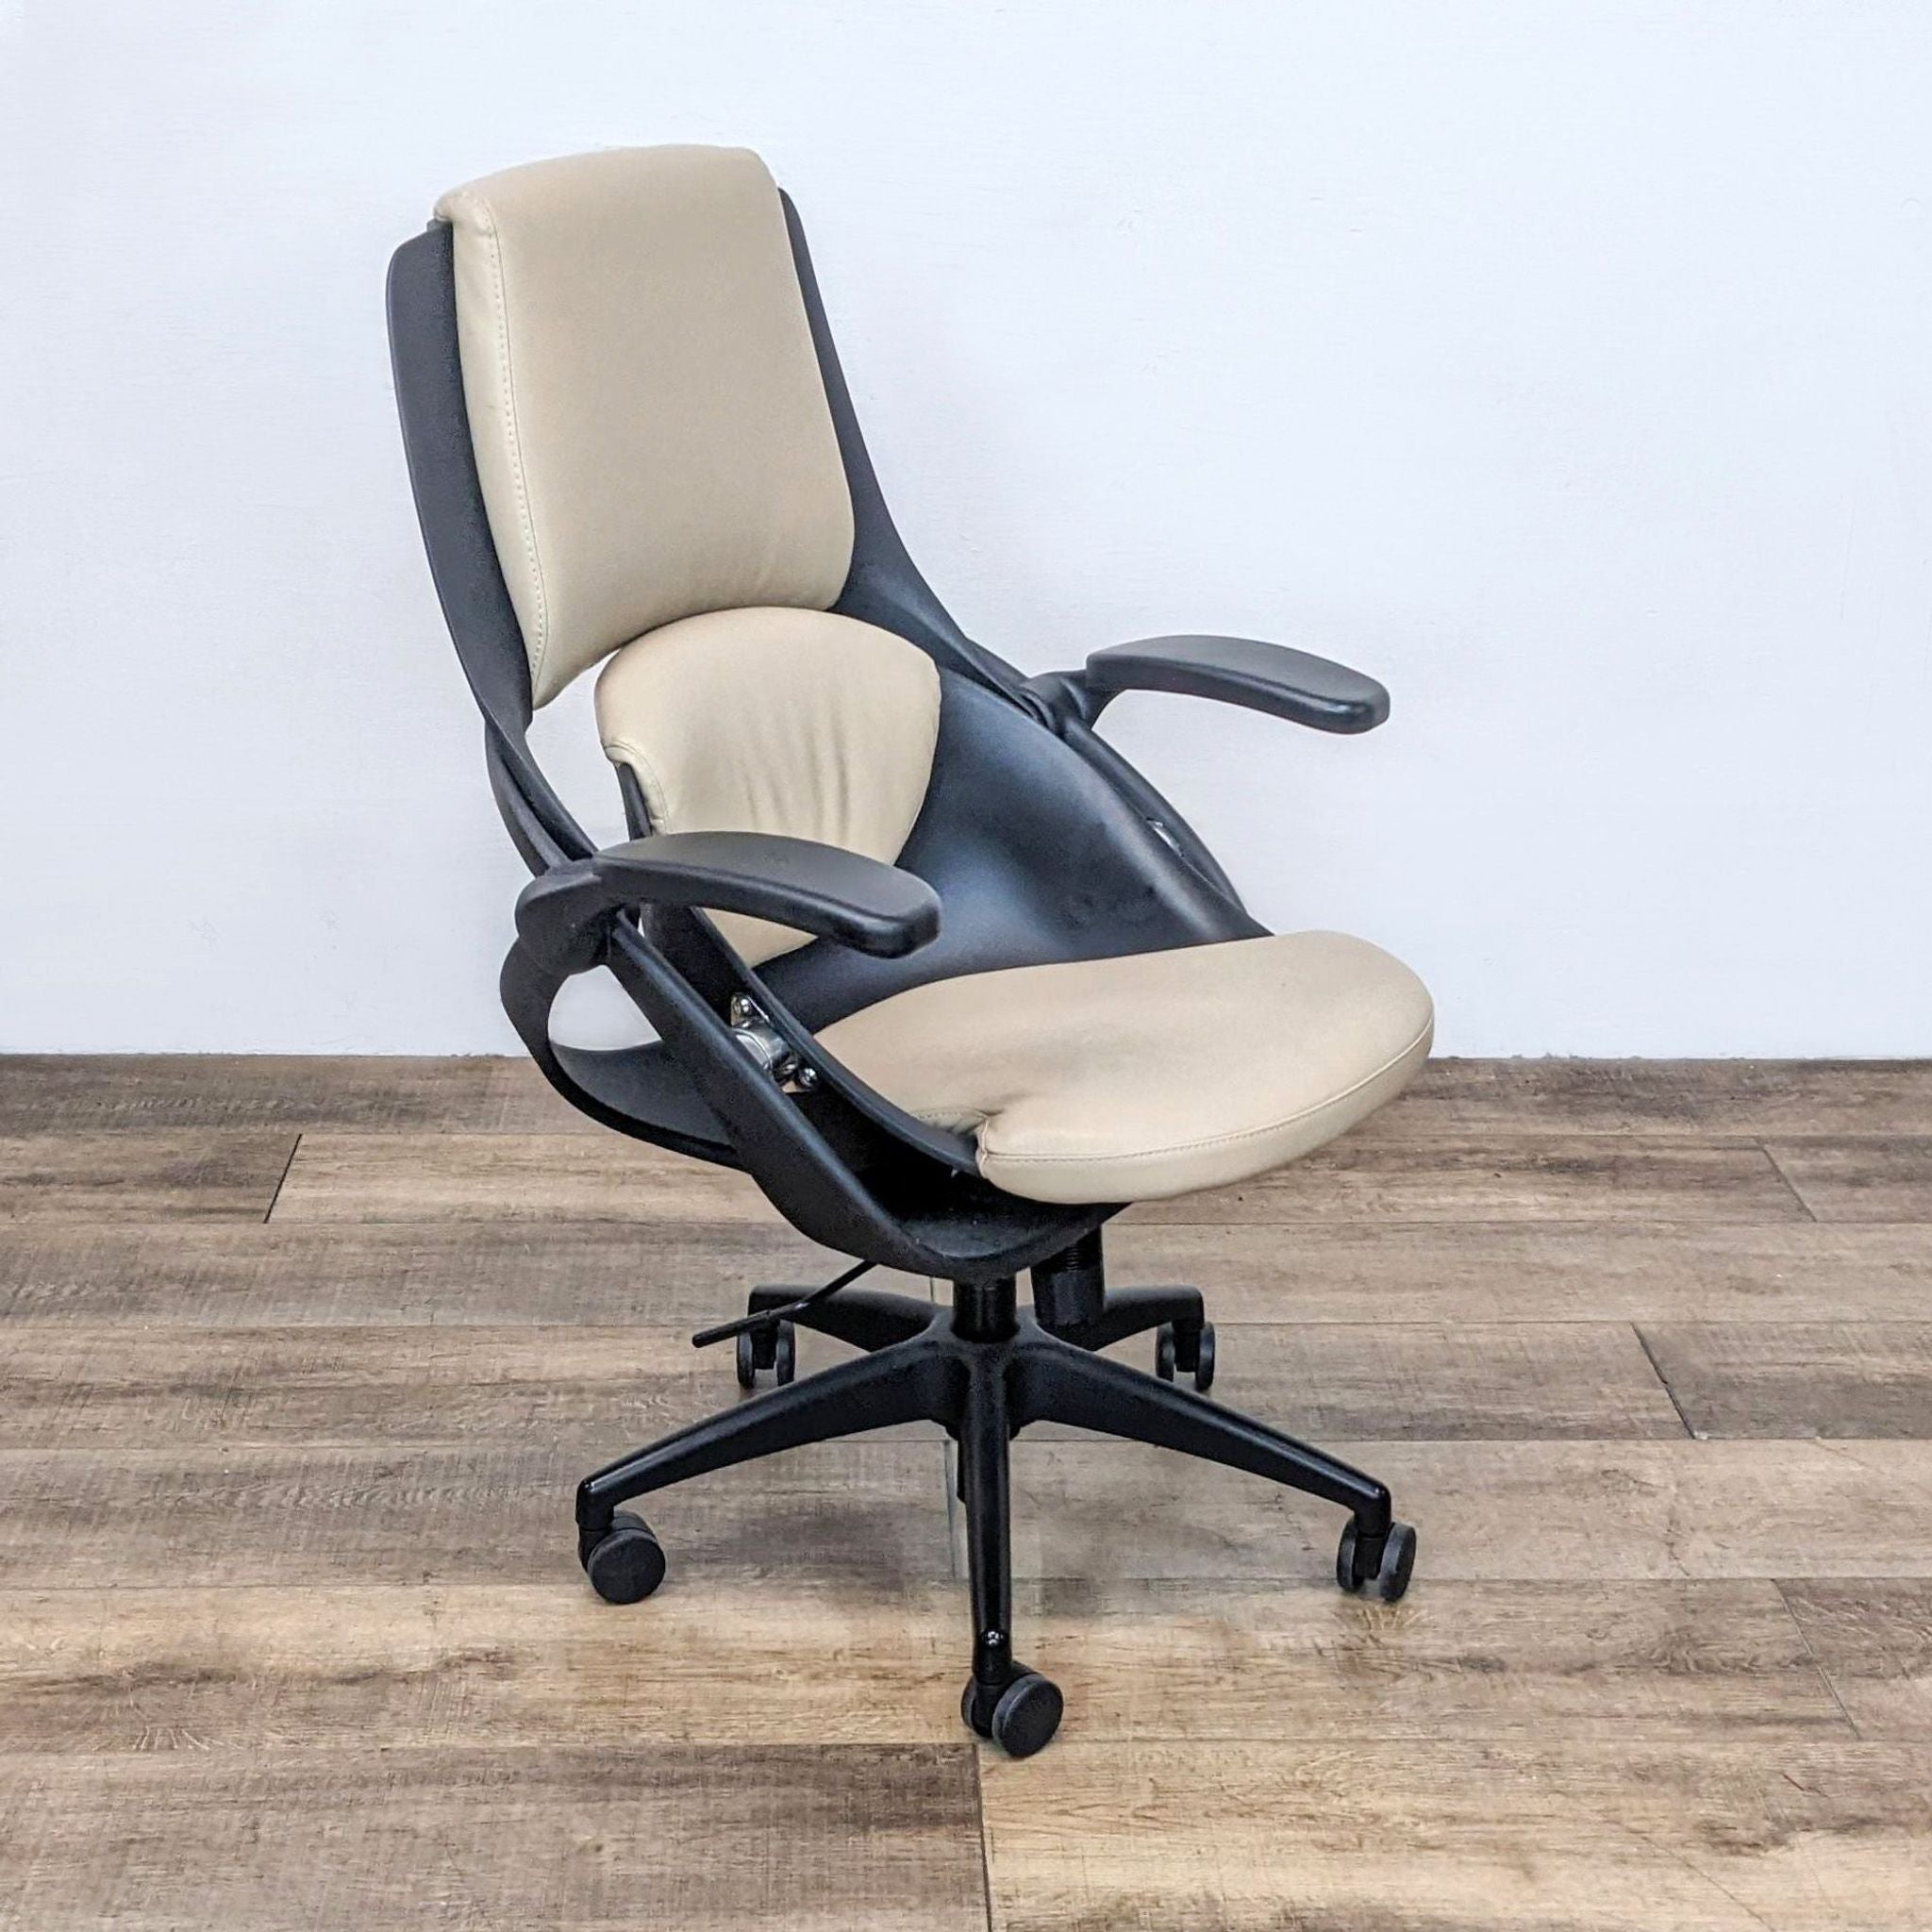 Ergonomic All33 Axion chair with aligned vertebrae support design, vegan leather, side view with slightly loose armrest.